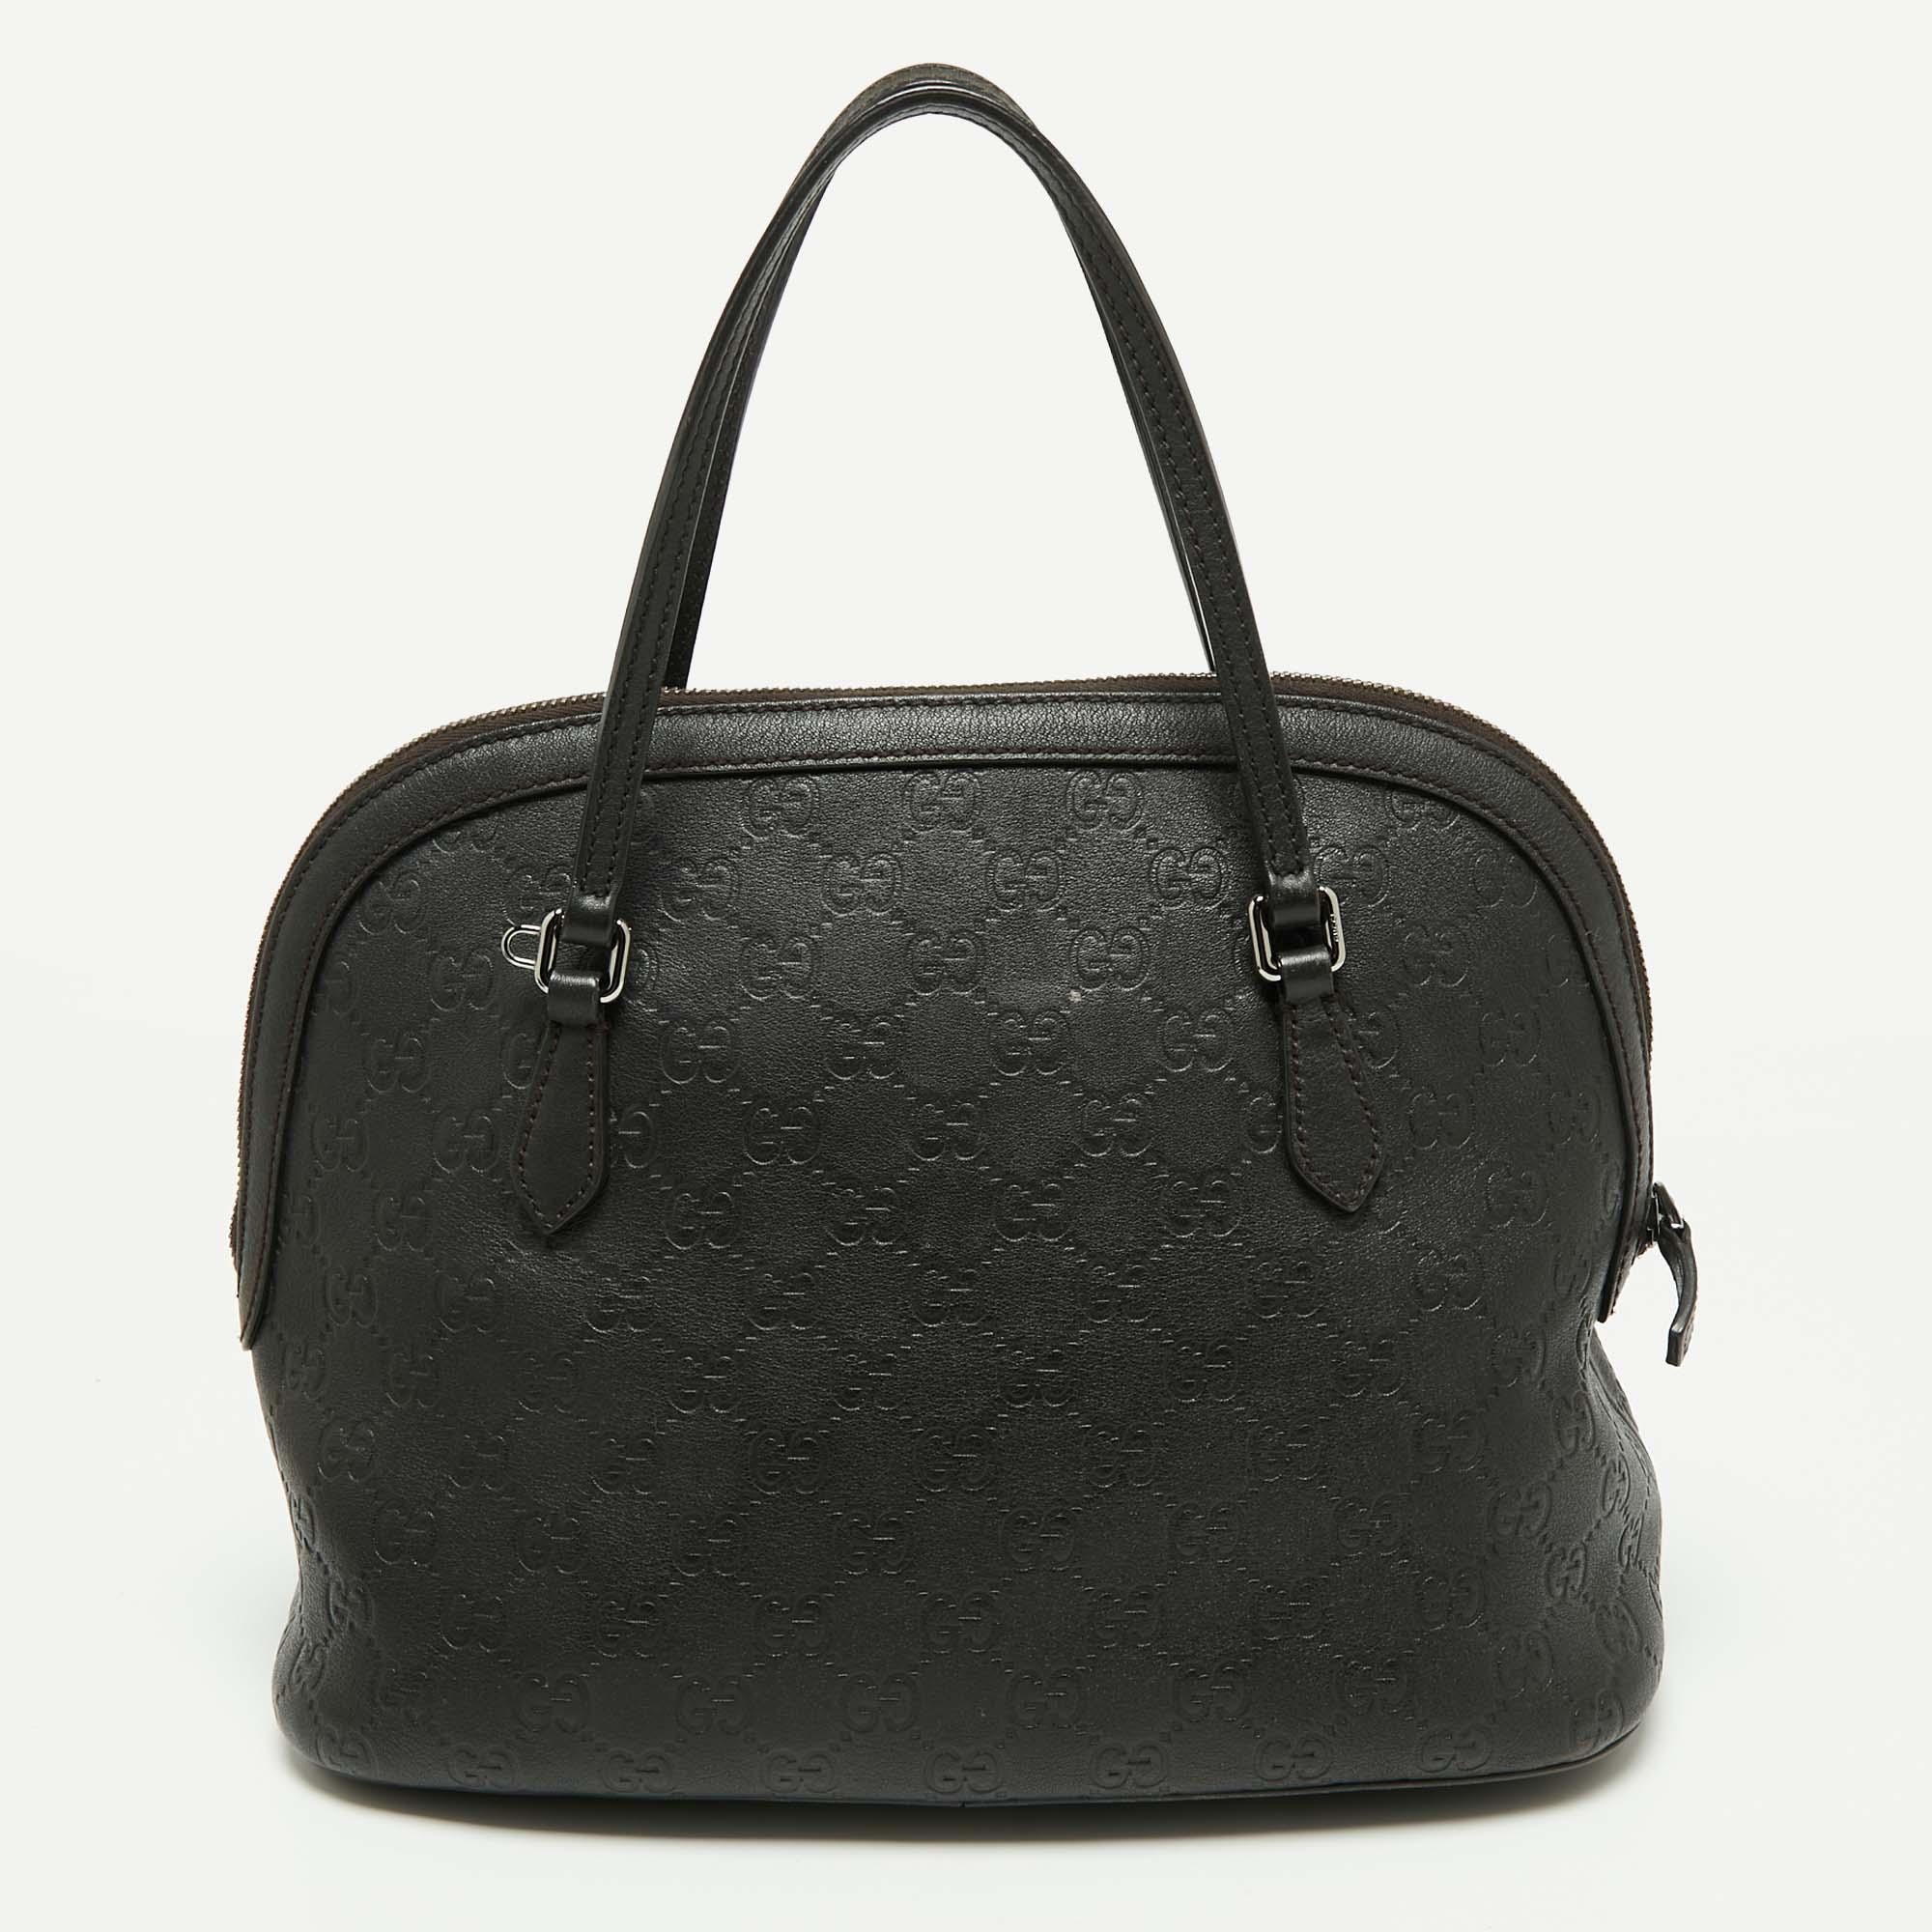 Acquire an elegant look wearing this Dome bag that has come from the house of Gucci. Its color exudes a subtle vibe, and Guccissima leather speaks luxury. The versatility lies in the dual-rolled handles and long shoulder strap that allows you to